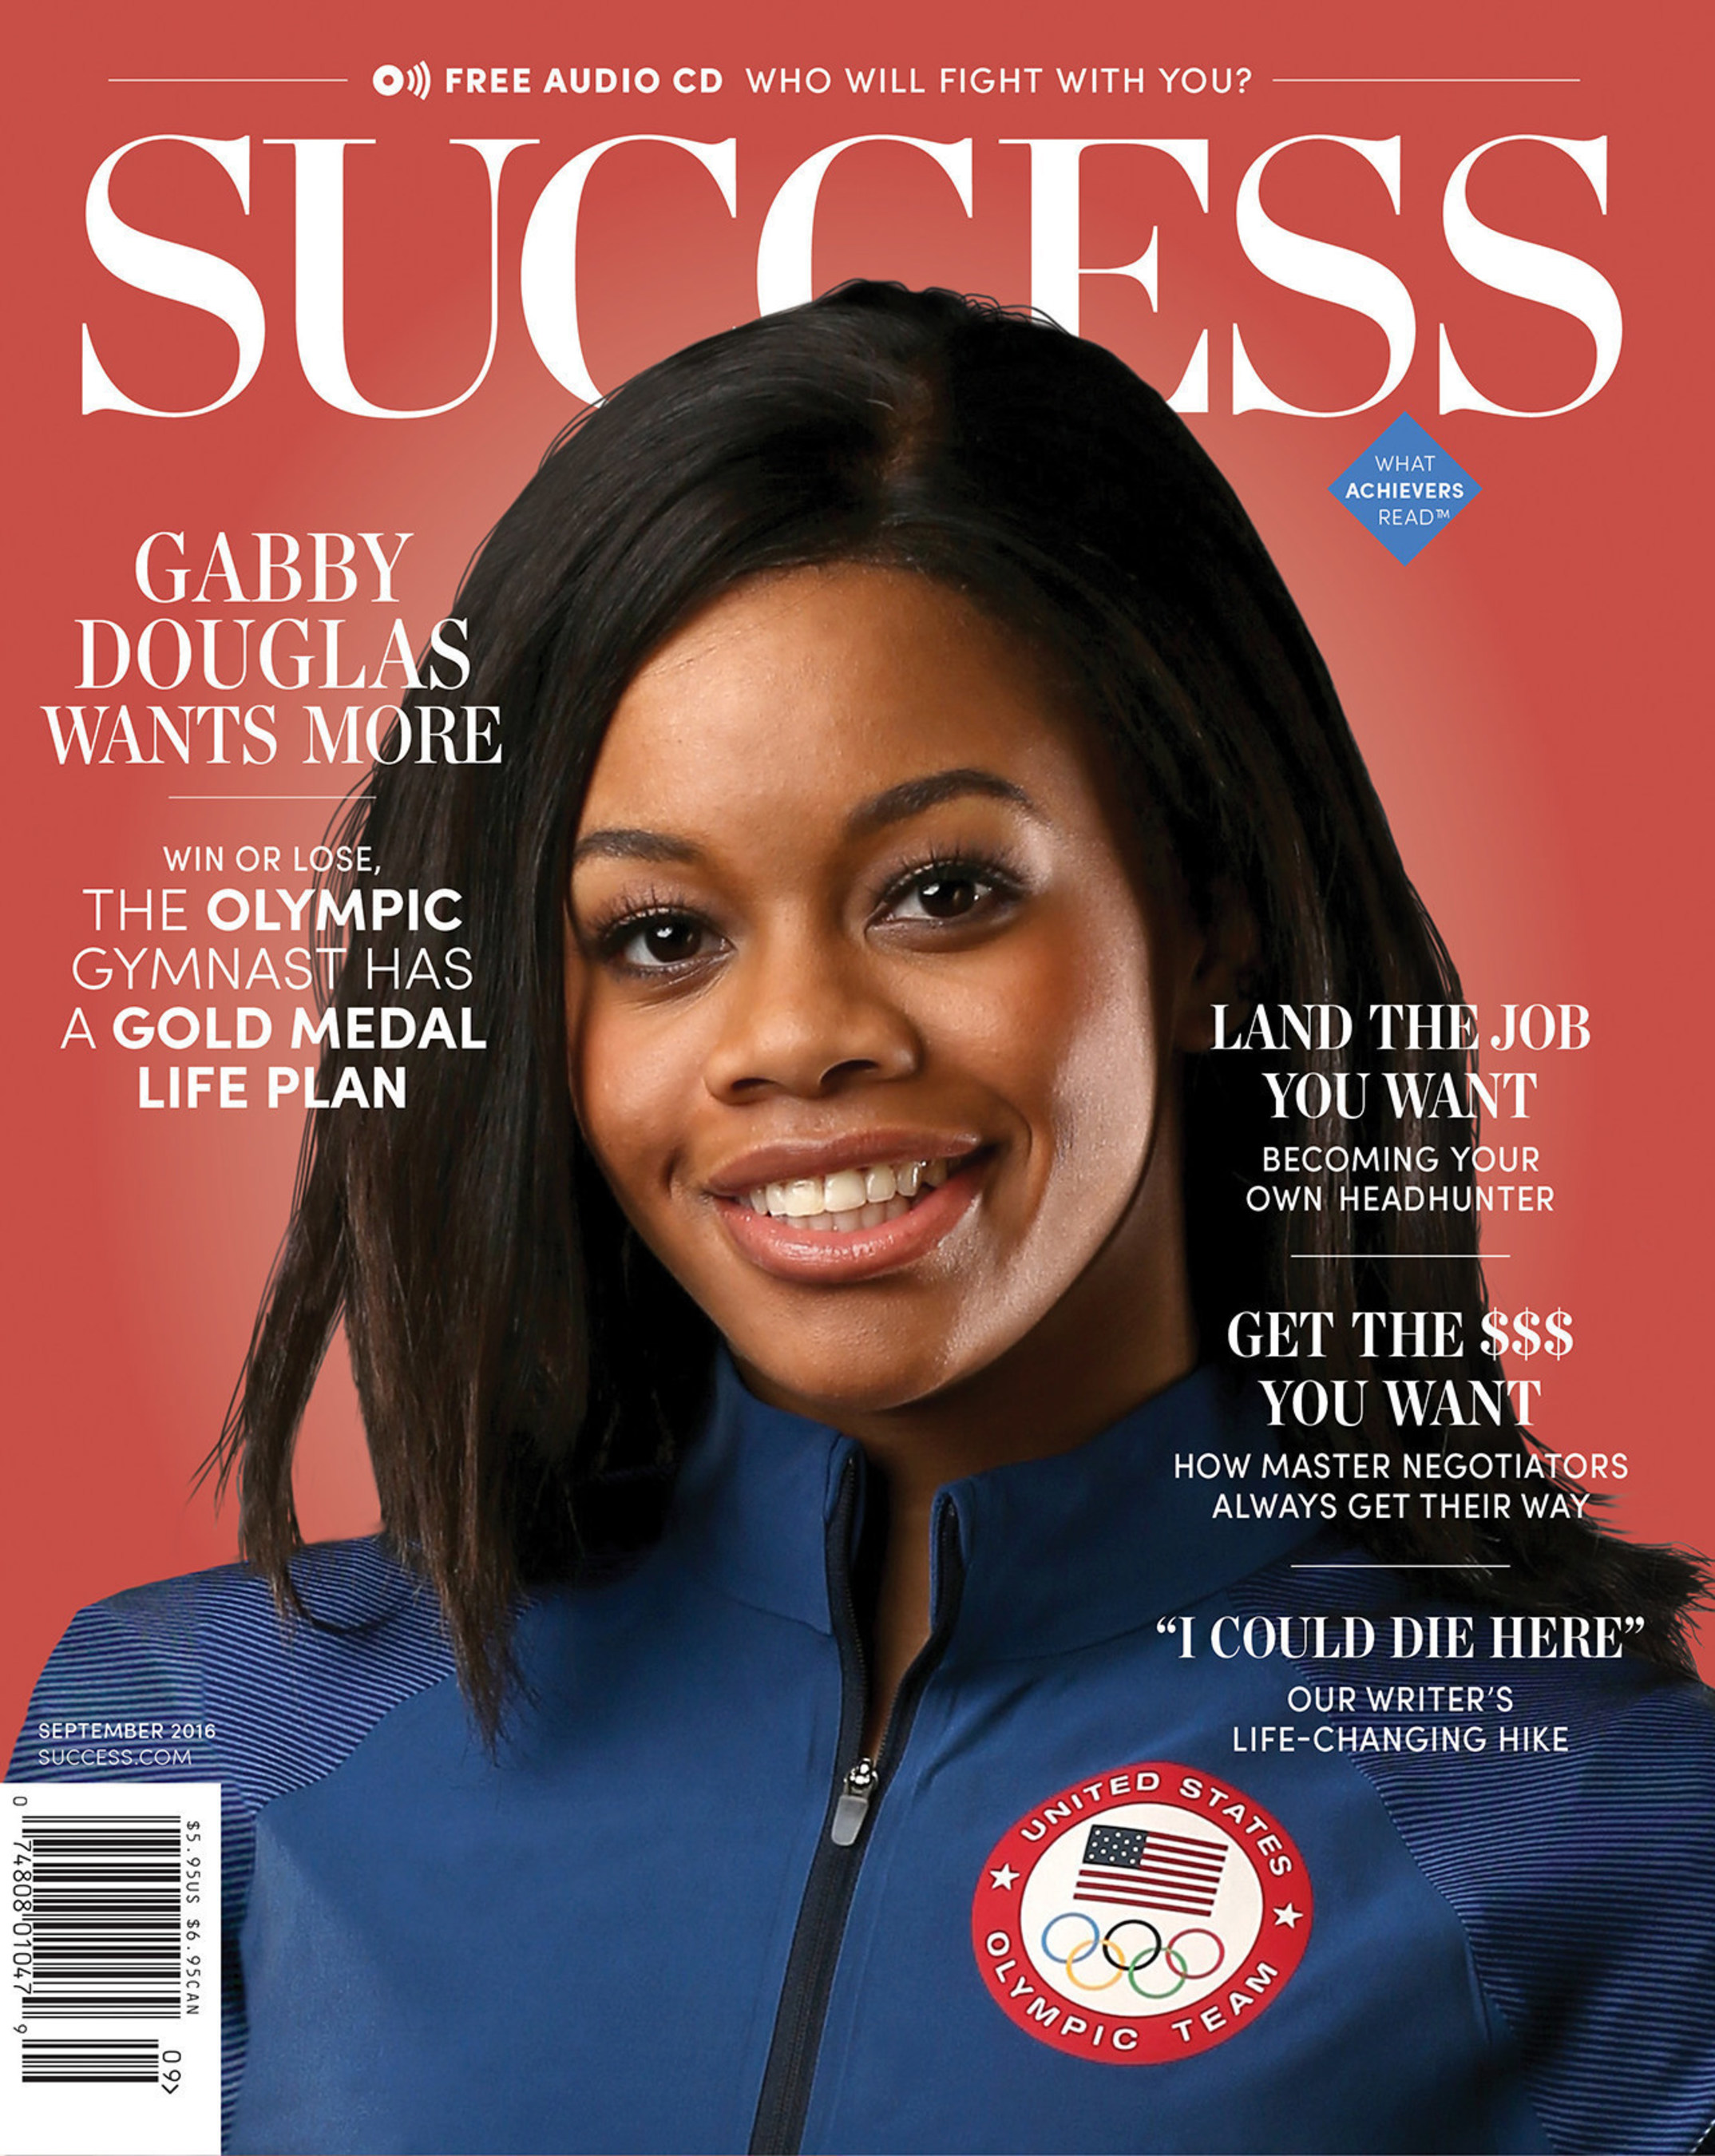 With two Gold medals adorning her neck, Douglas, the cover story of SUCCESS Magazine's September issue, shares why she hopes to make history again with another gold medal in the 2016 games.